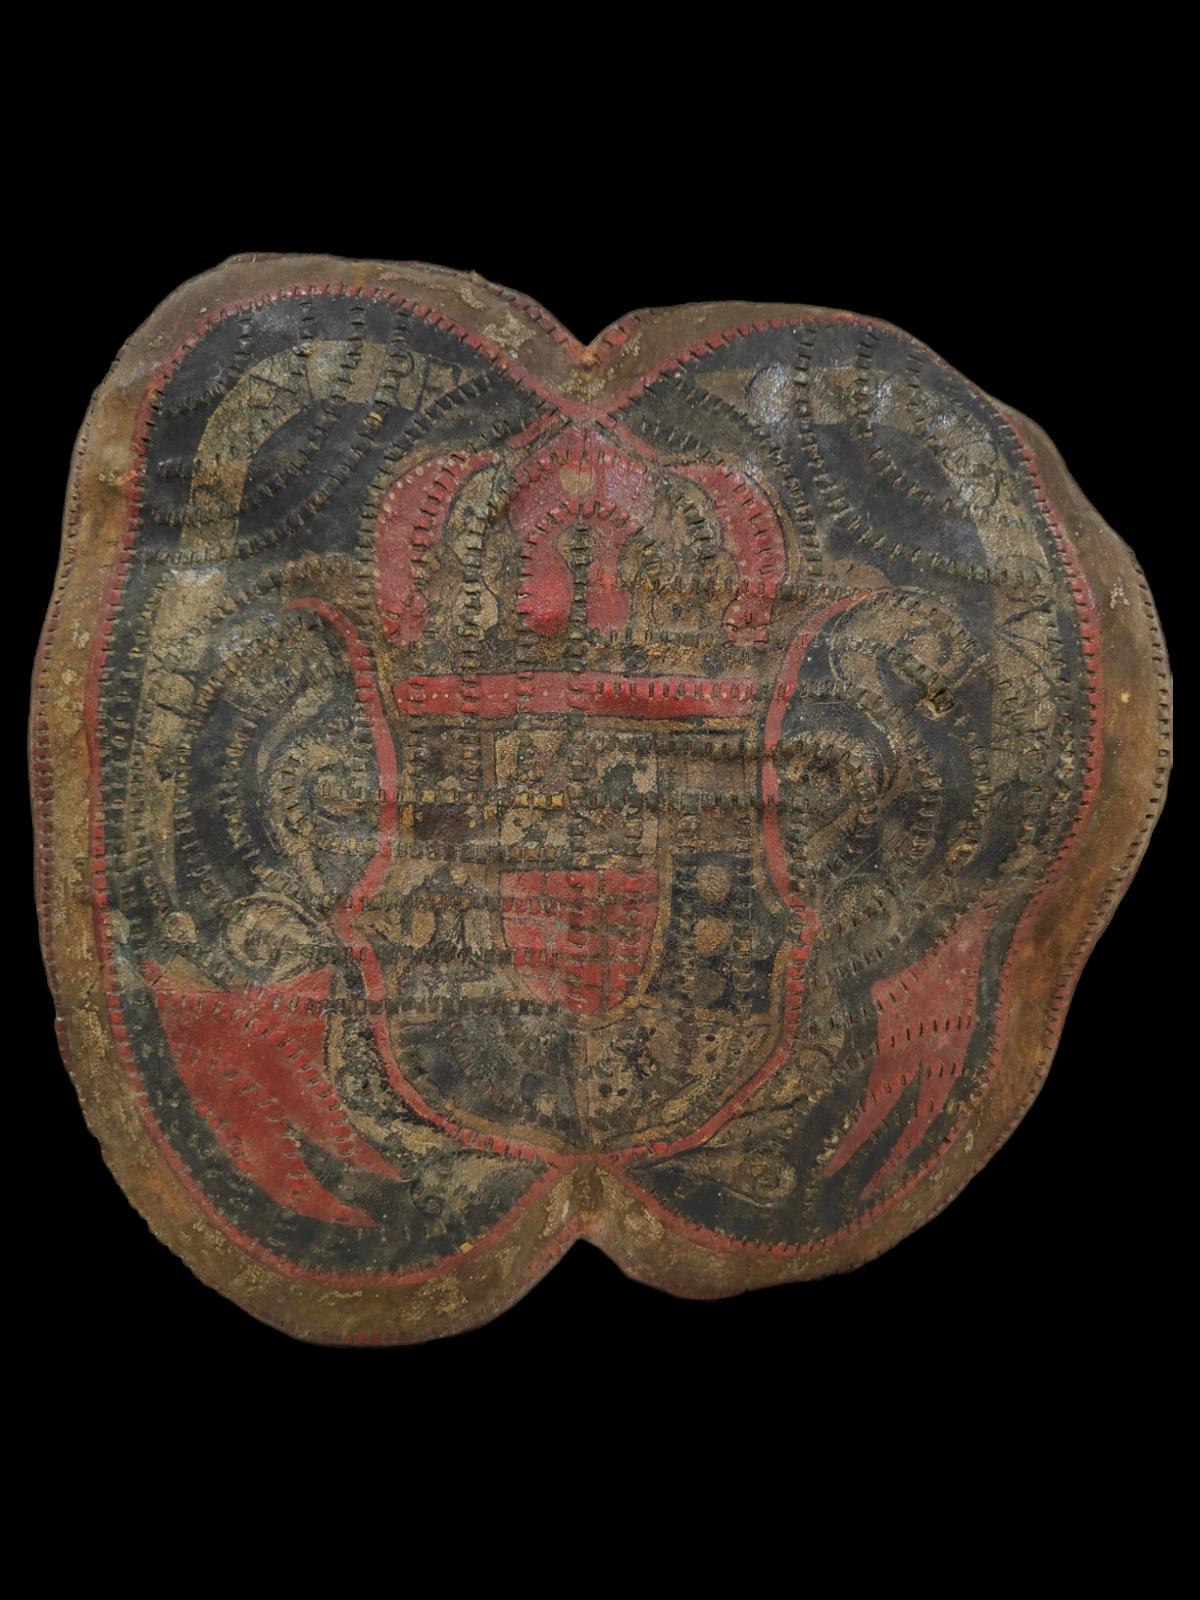 Spanish Colonial Mexican Shield 17-18th Century